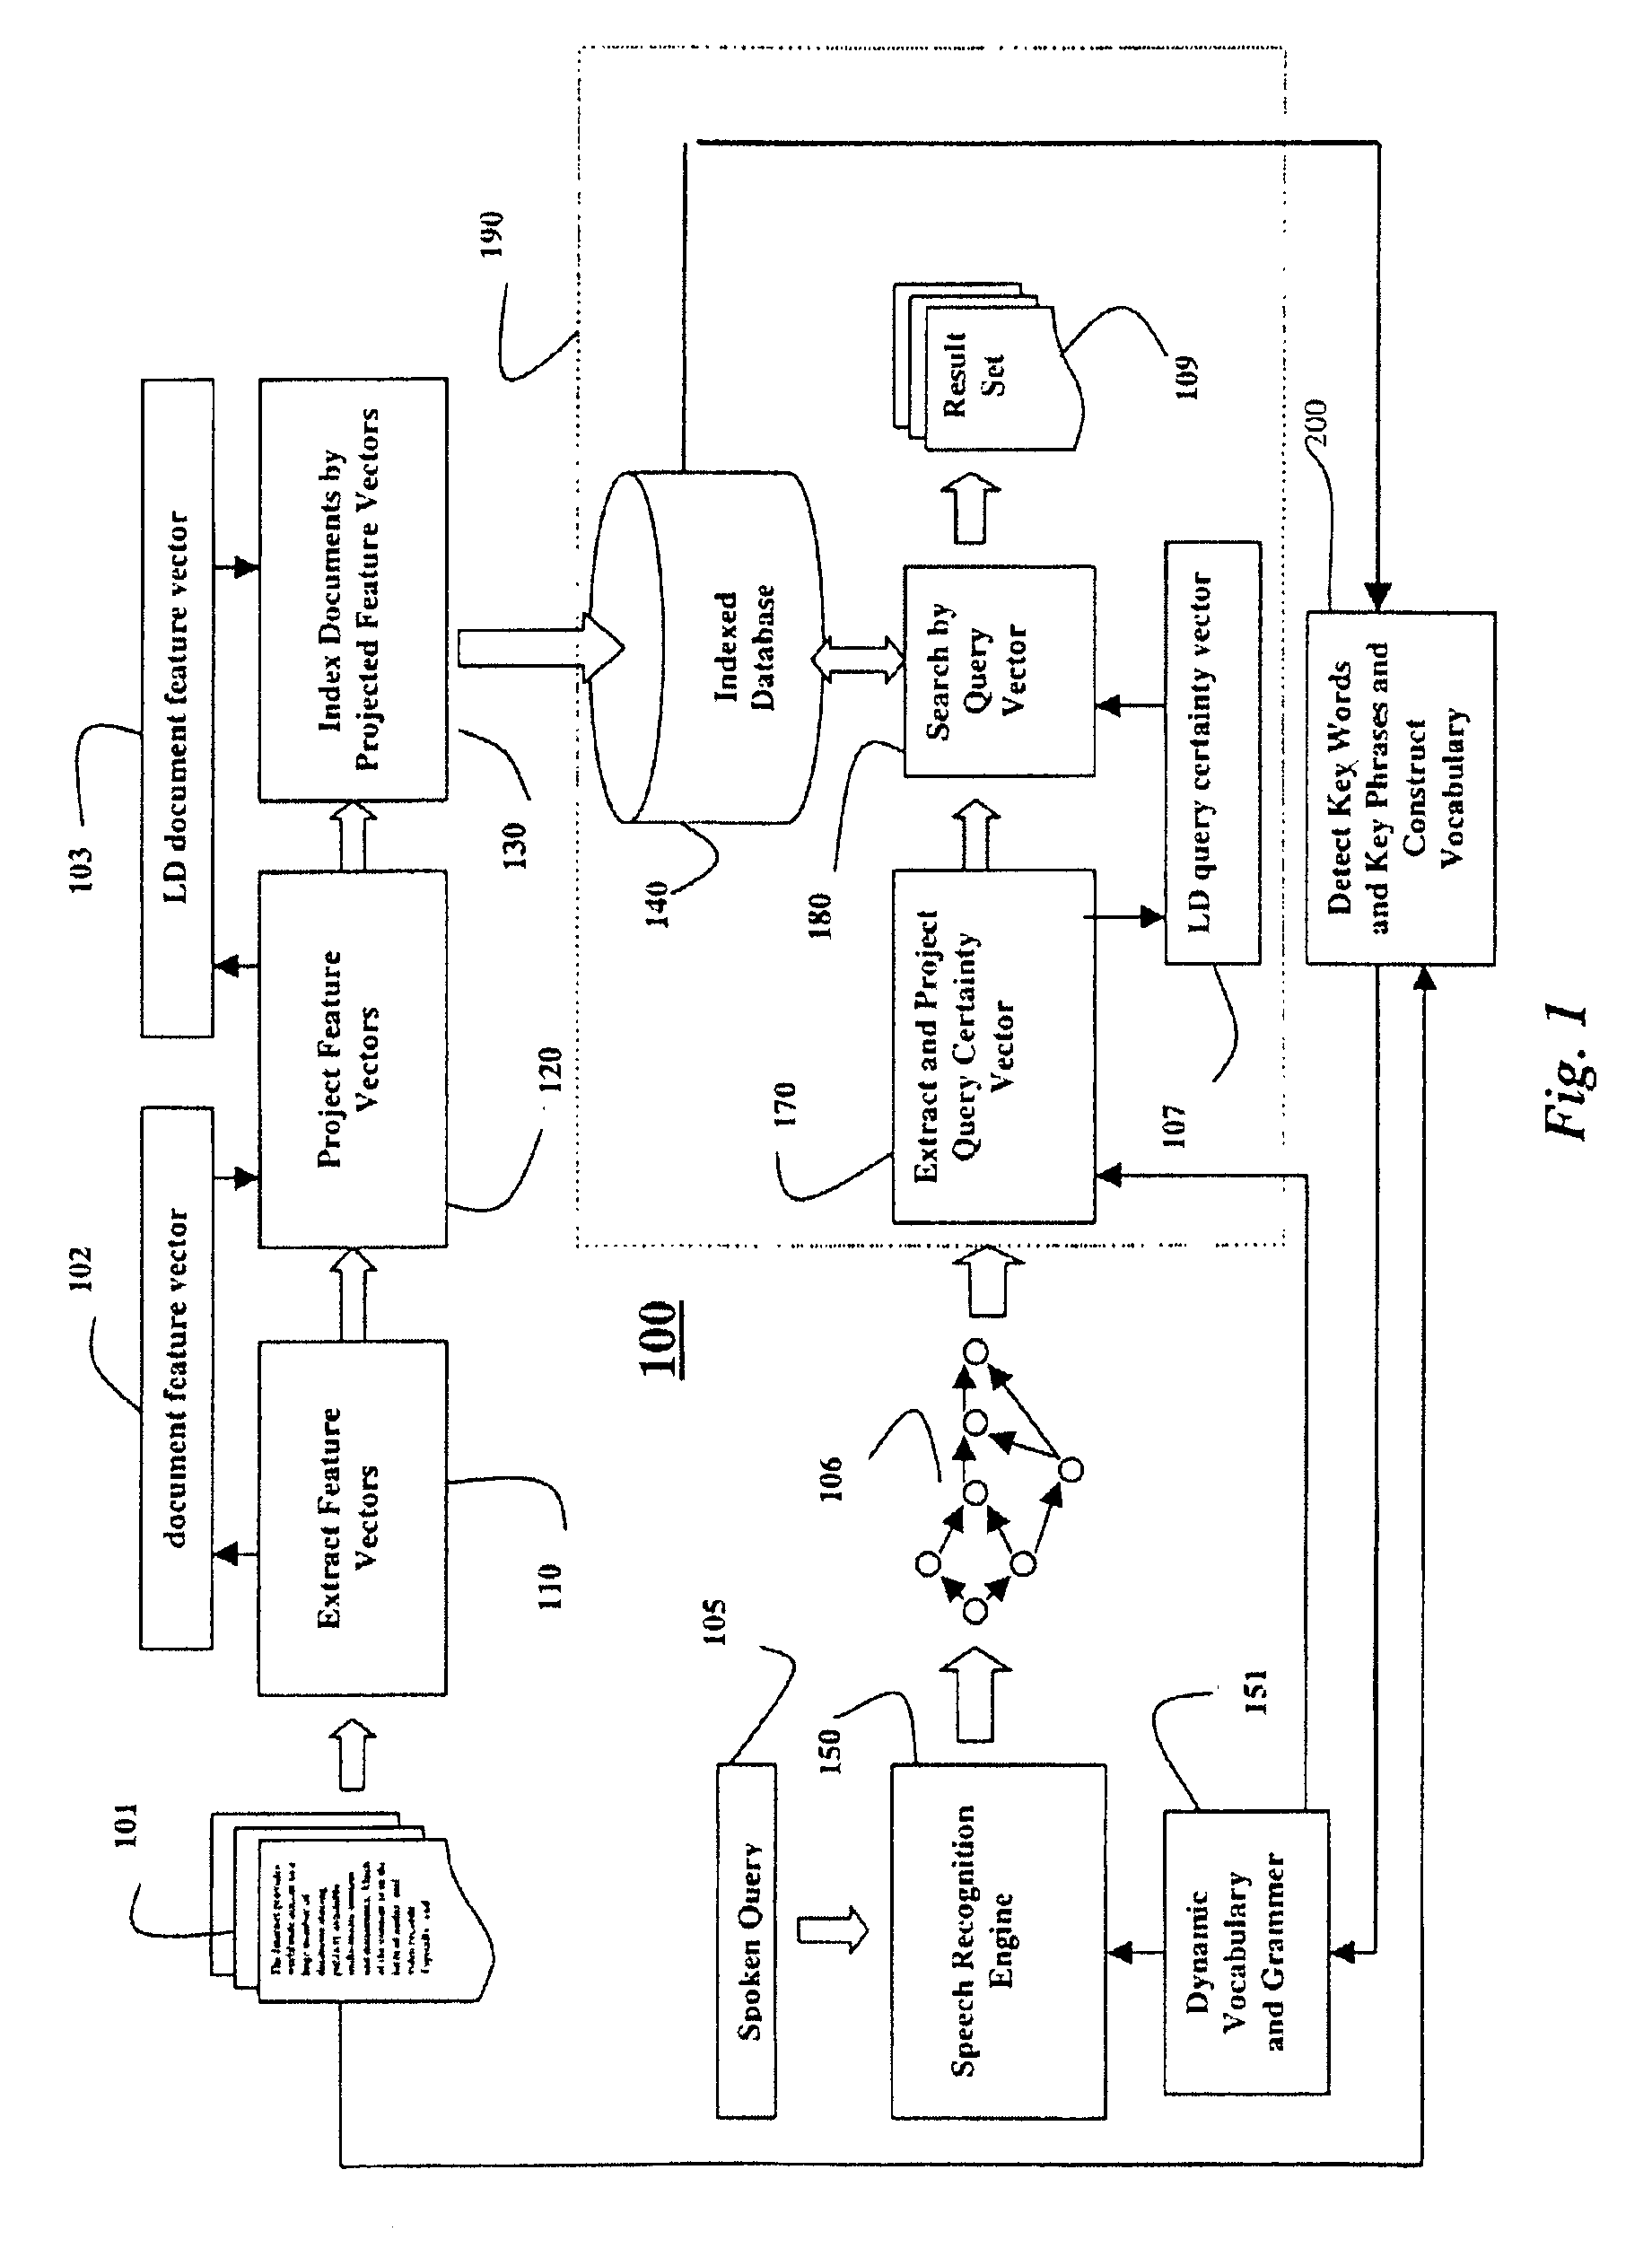 Method and system for retrieving documents with spoken queries